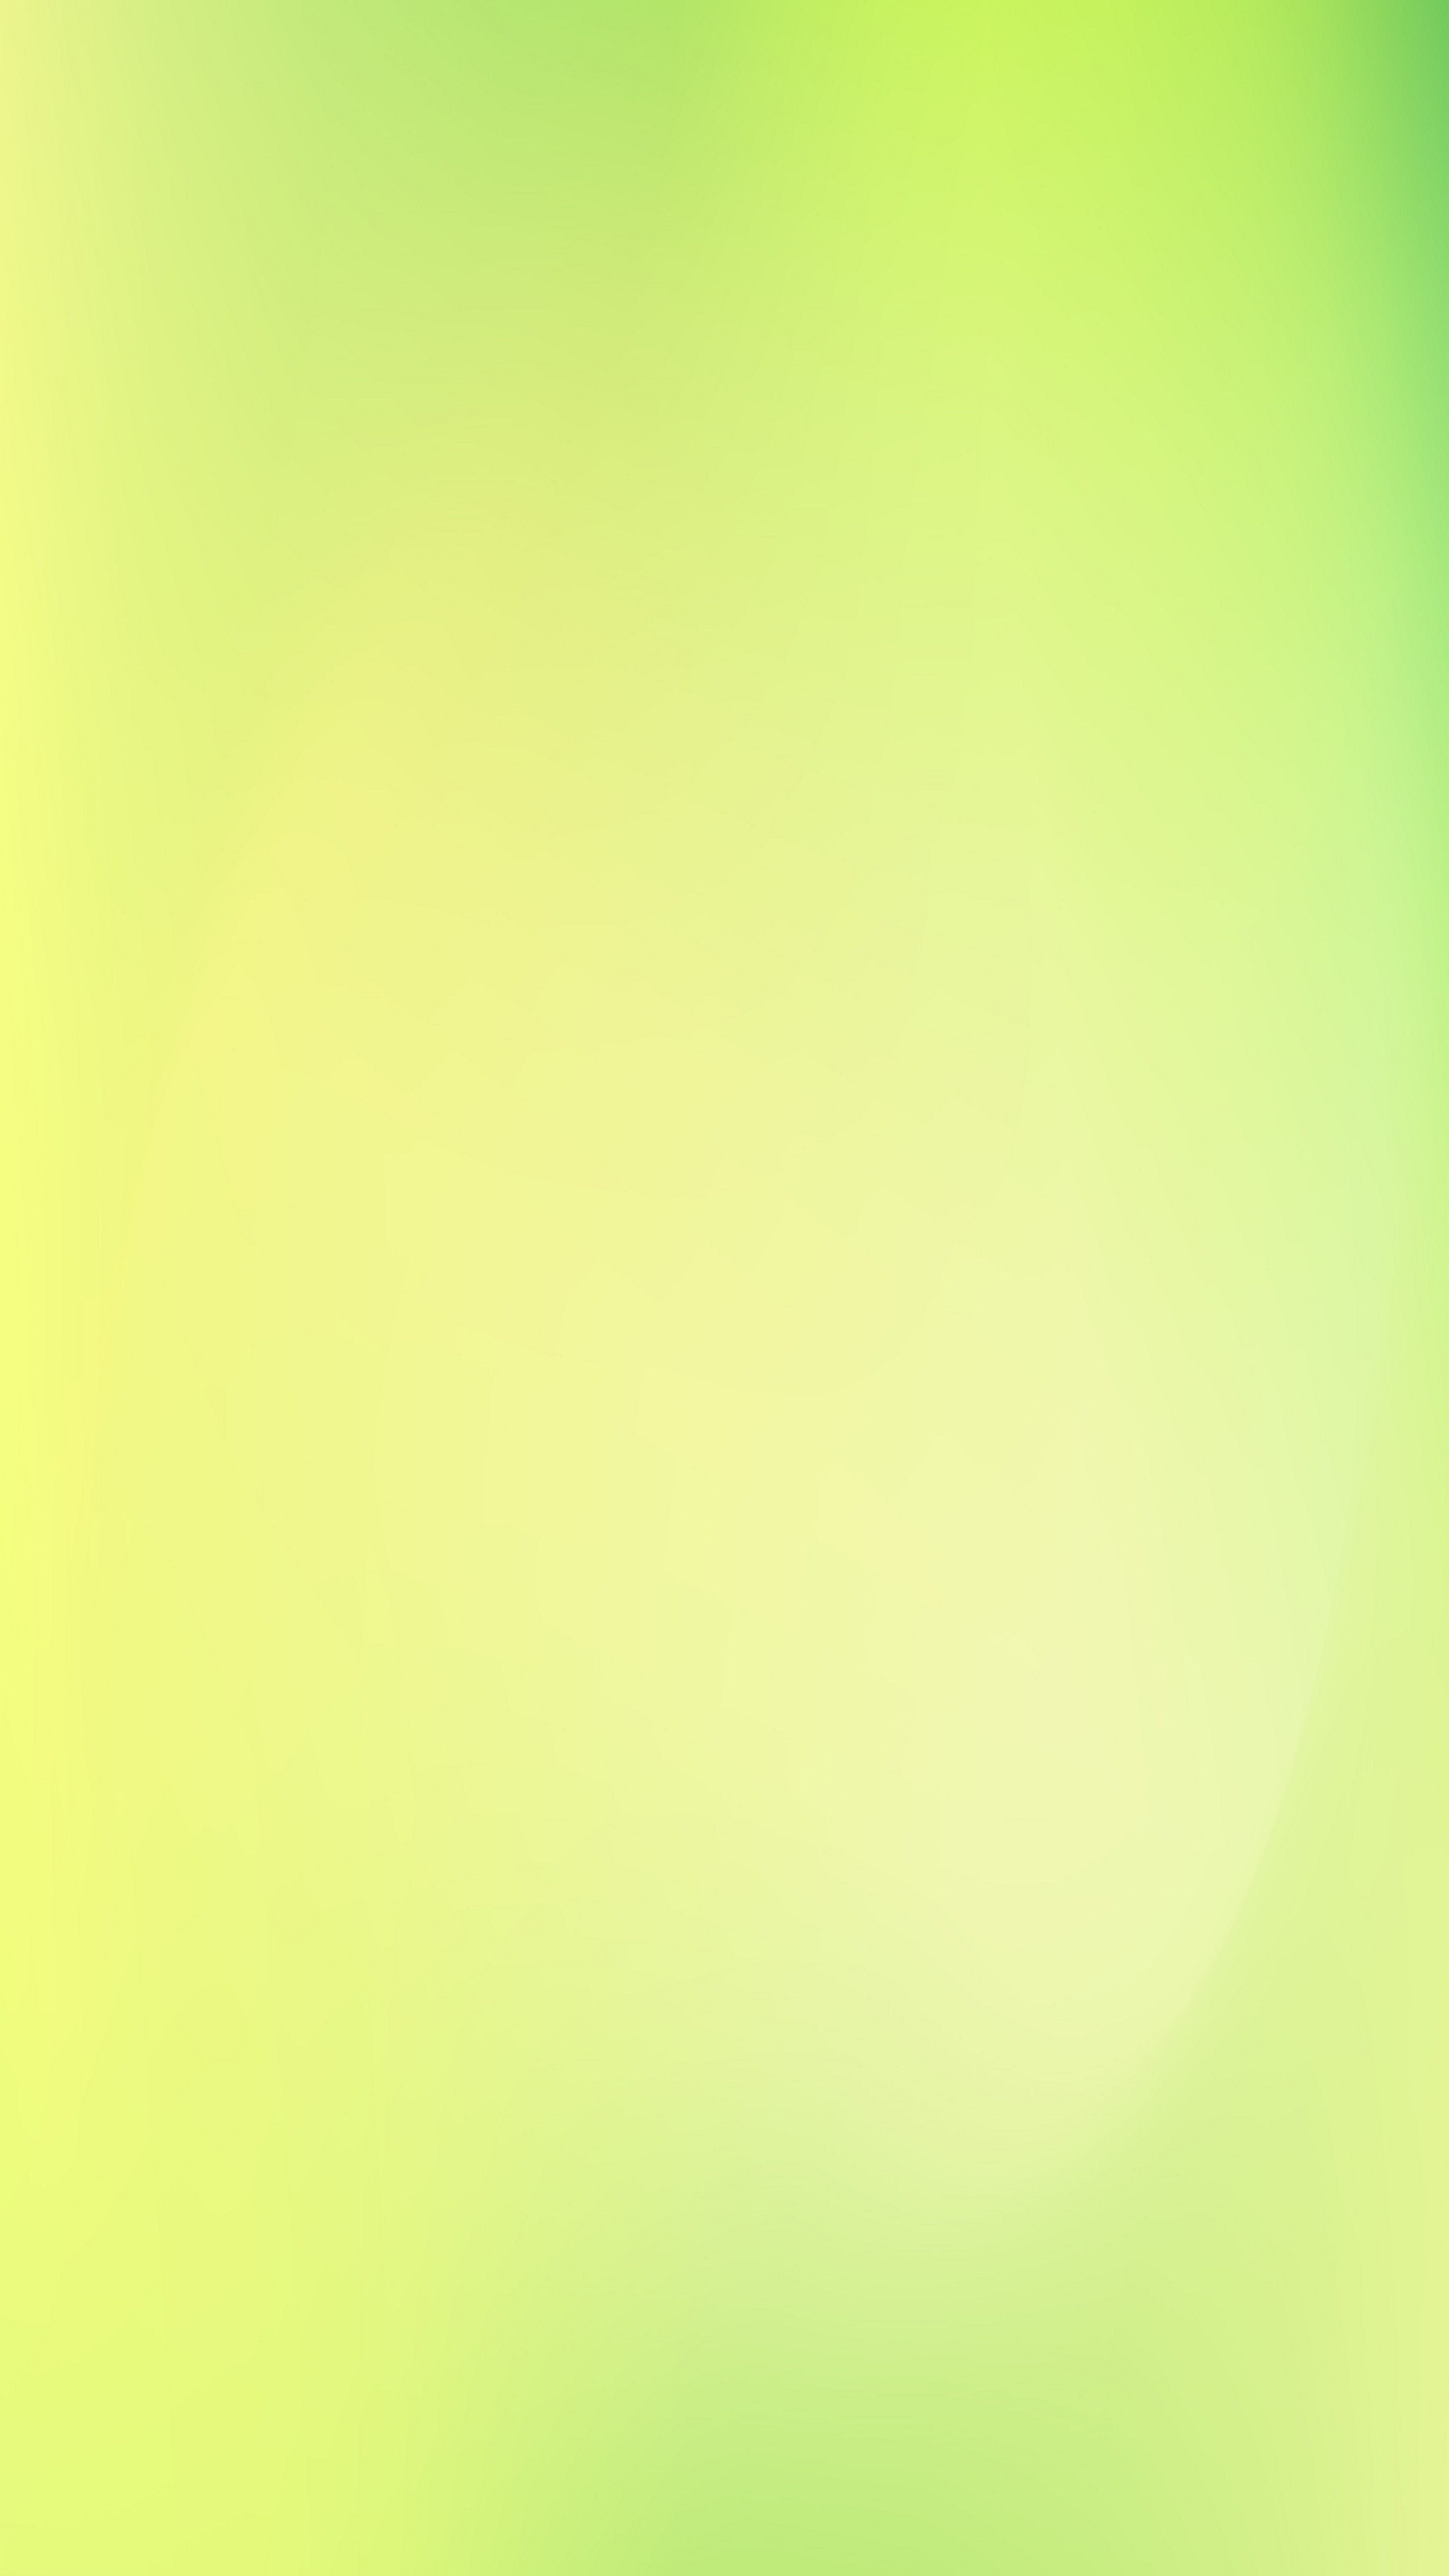 Yellow And Green Gradient - HD Wallpaper 